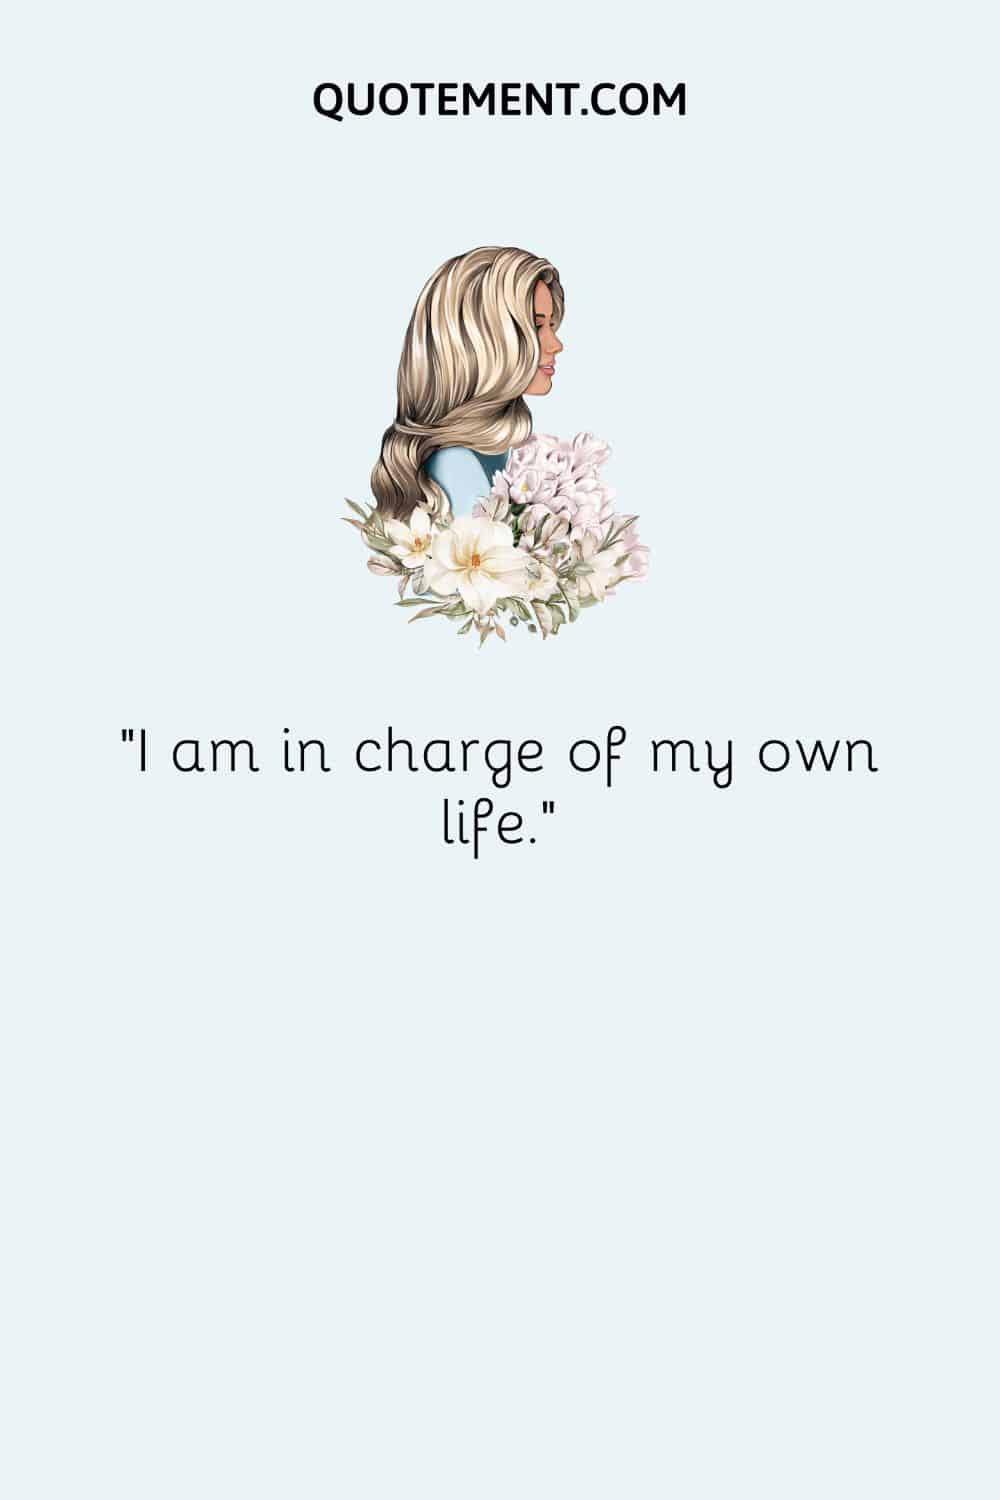 I am in charge of my own life